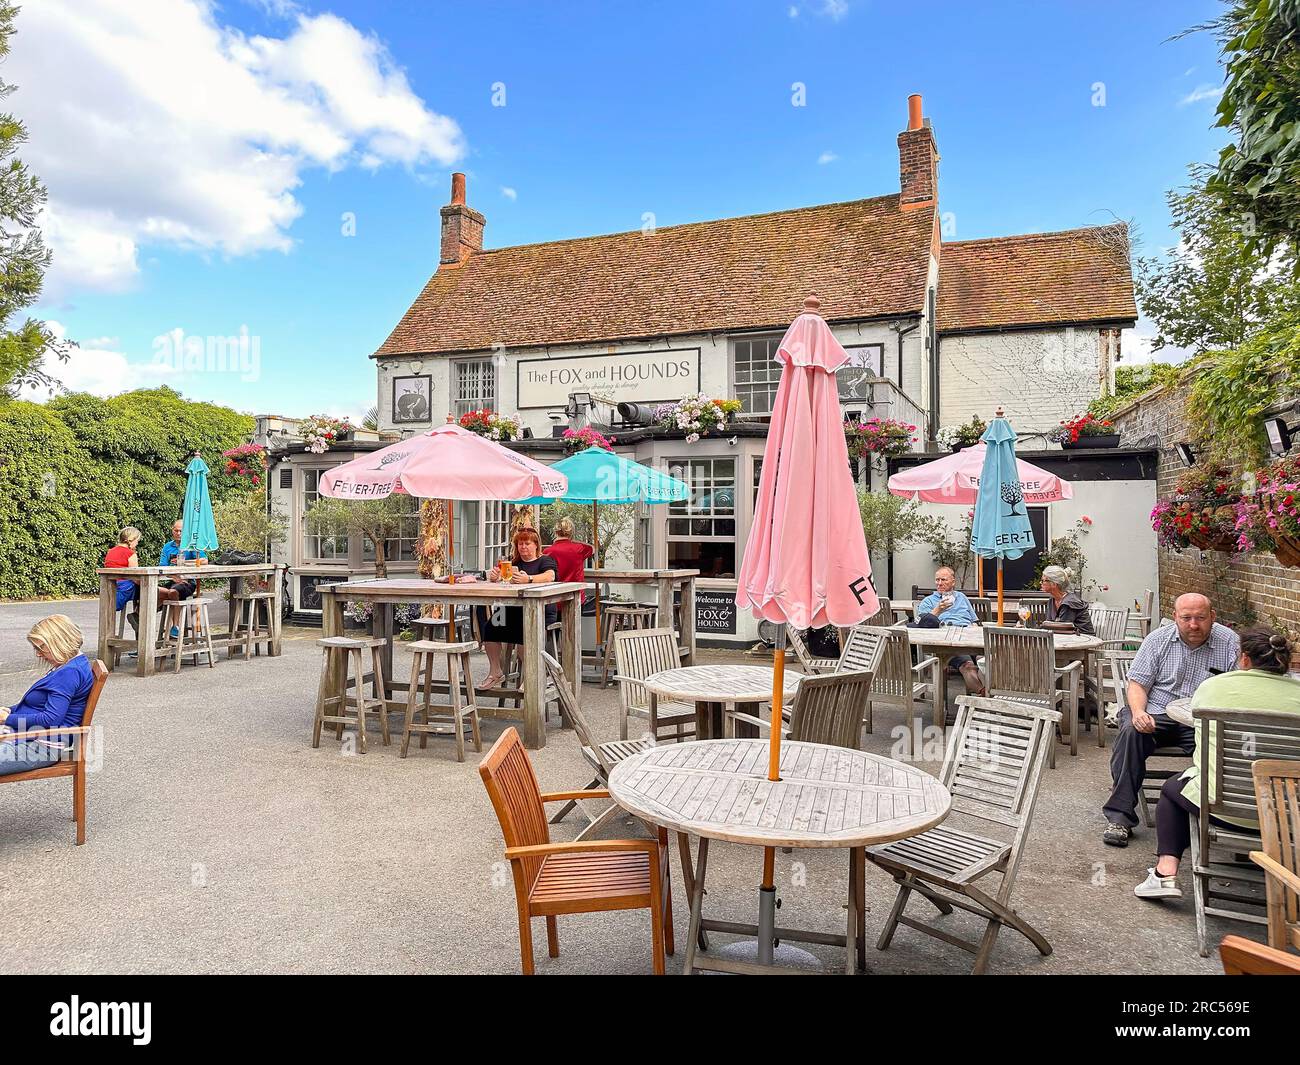 The Fox and Hounds Pub, Bishopsgate Road, Englefield Green, Surrey, Angleterre, Royaume-Uni Banque D'Images